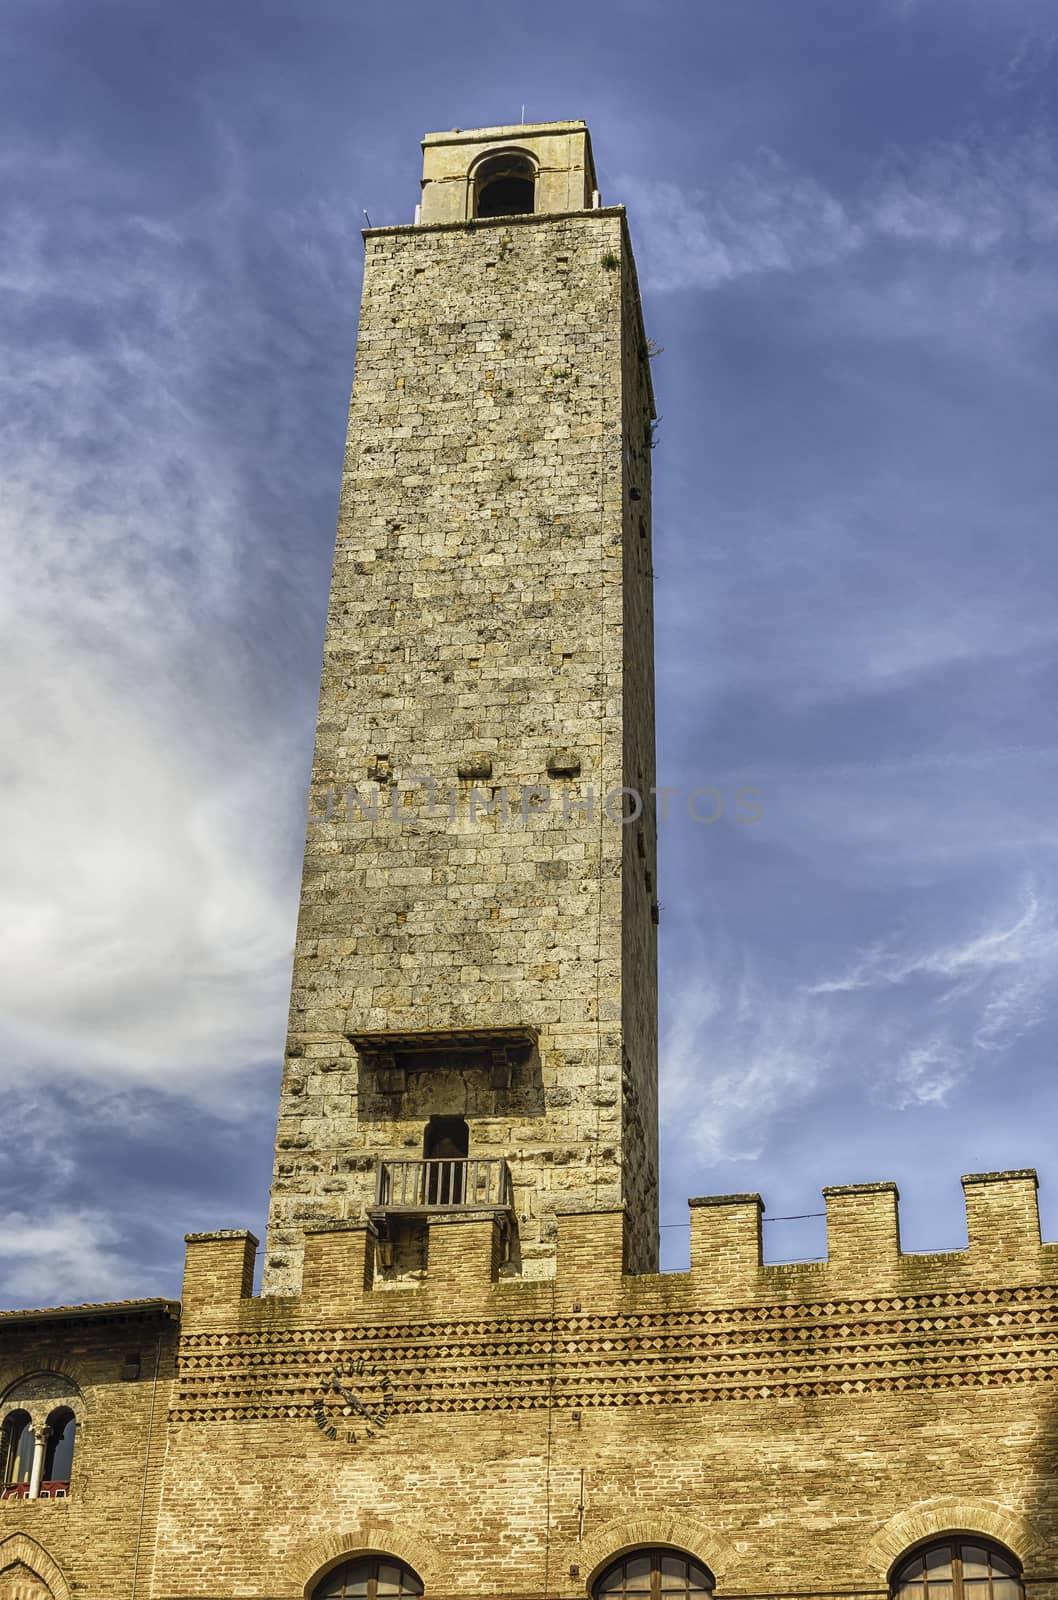 View of Torre Grossa, tallest tower in San Gimignano, Italy by marcorubino